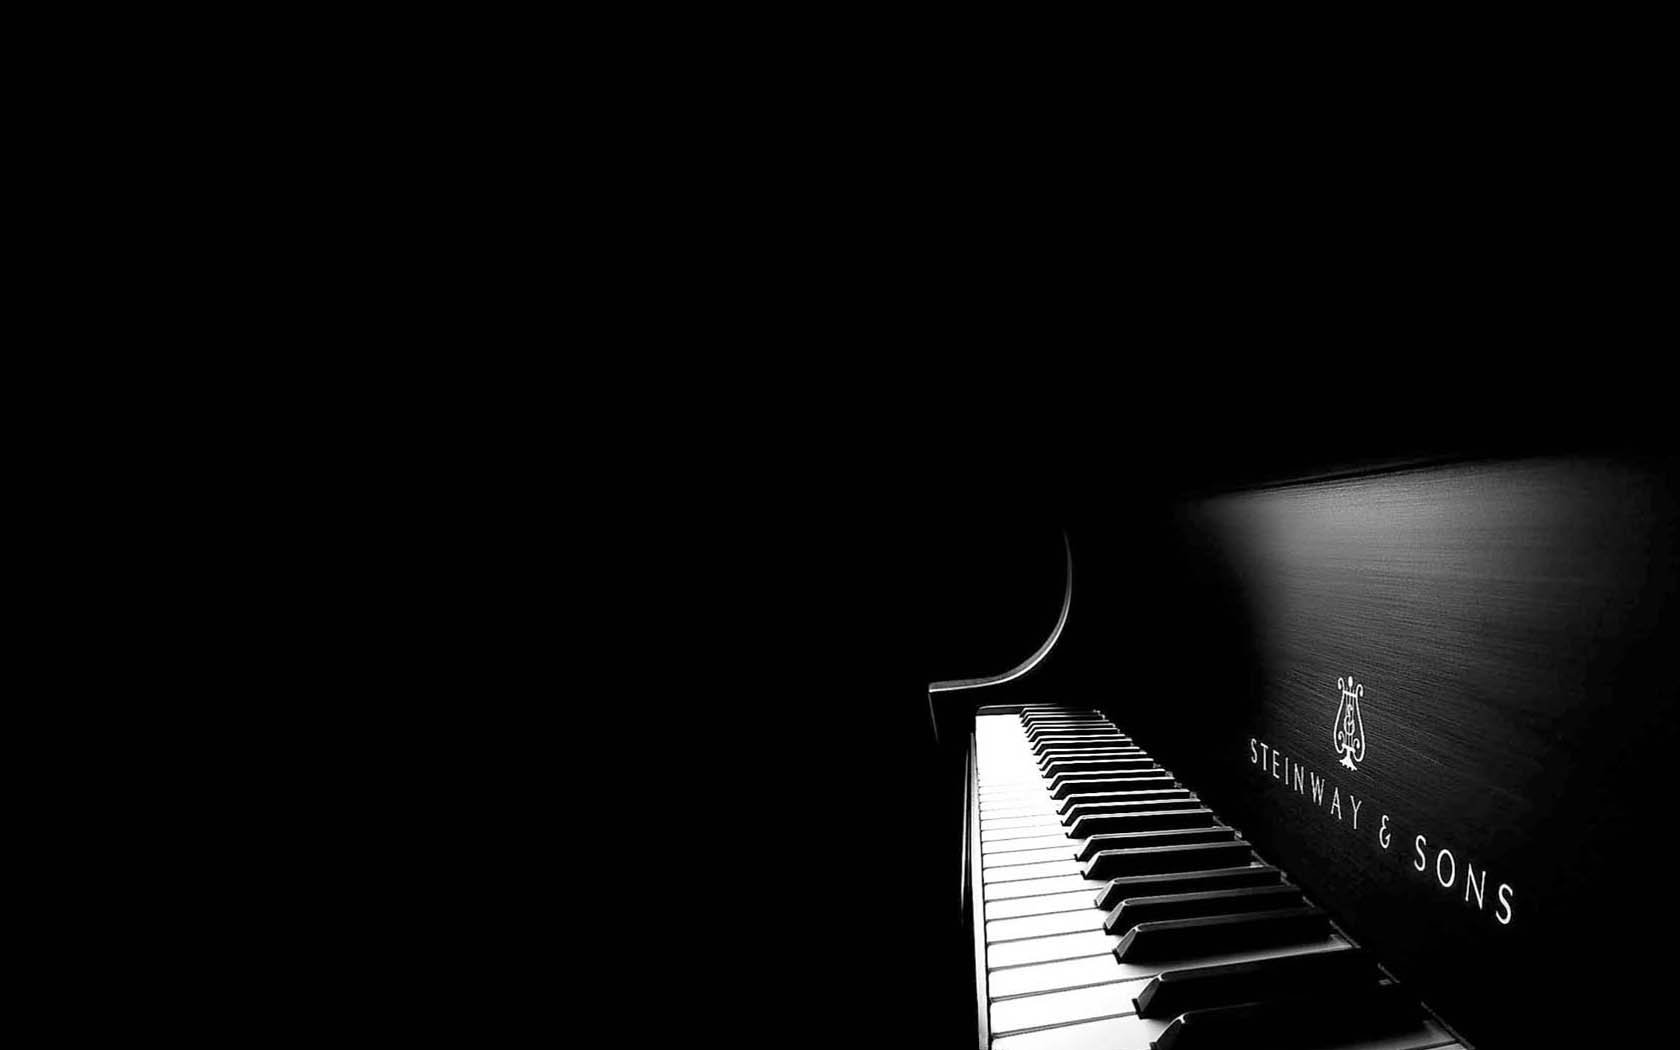 Steinway Sons Wallpaper And Background Image Id